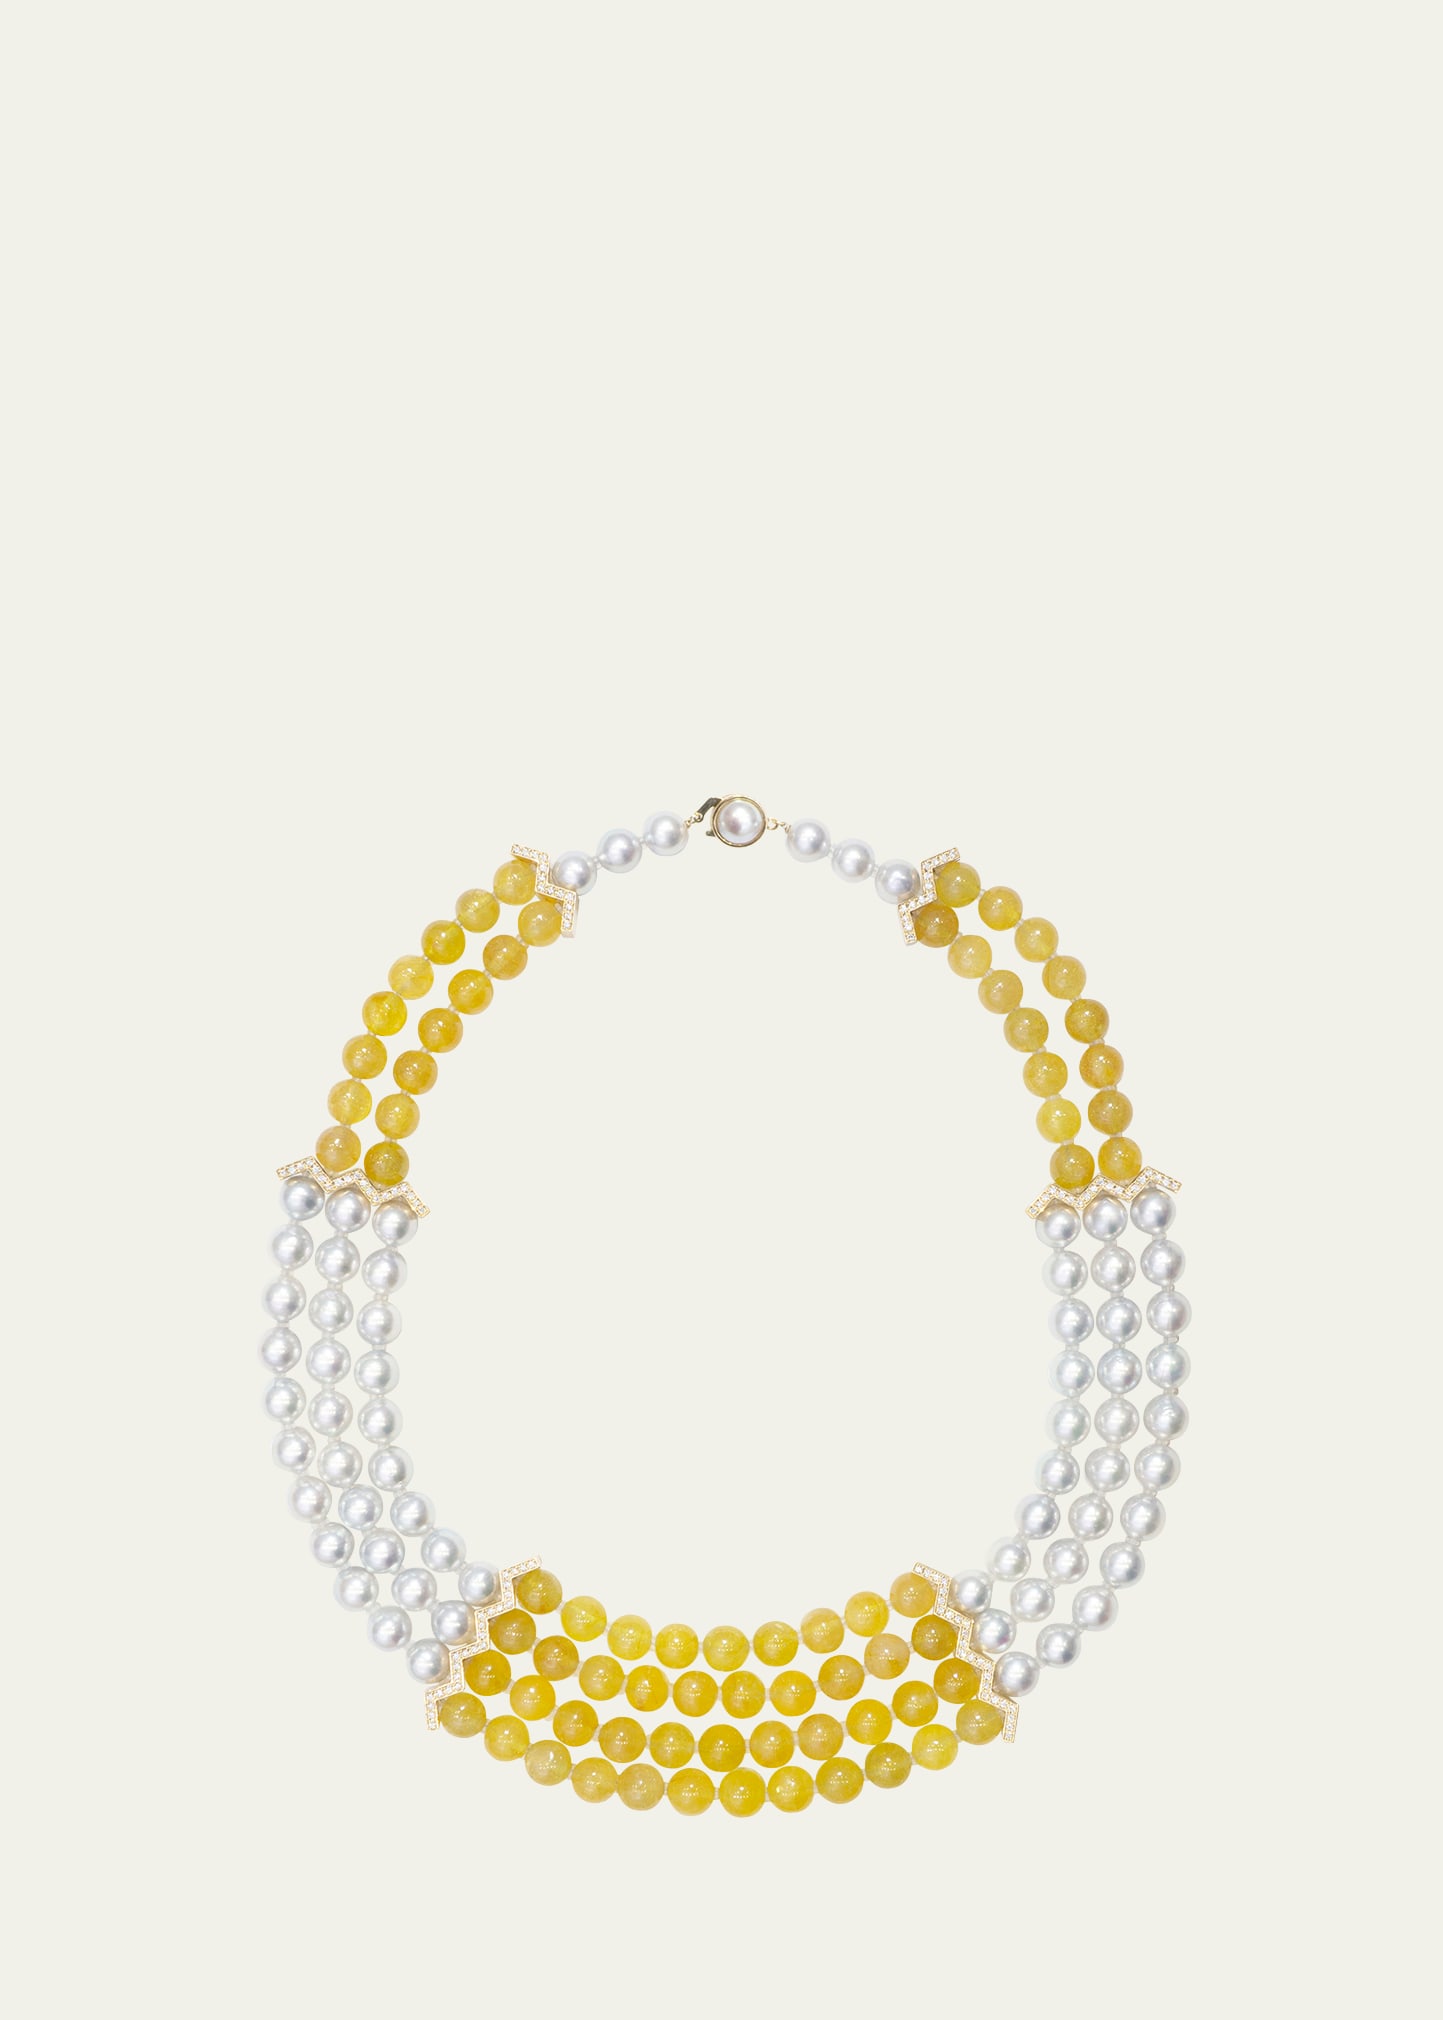 Yutai 18k Yellow Gold Modular Necklace With Yellow Sapphires And Cultured Akoya Pearls